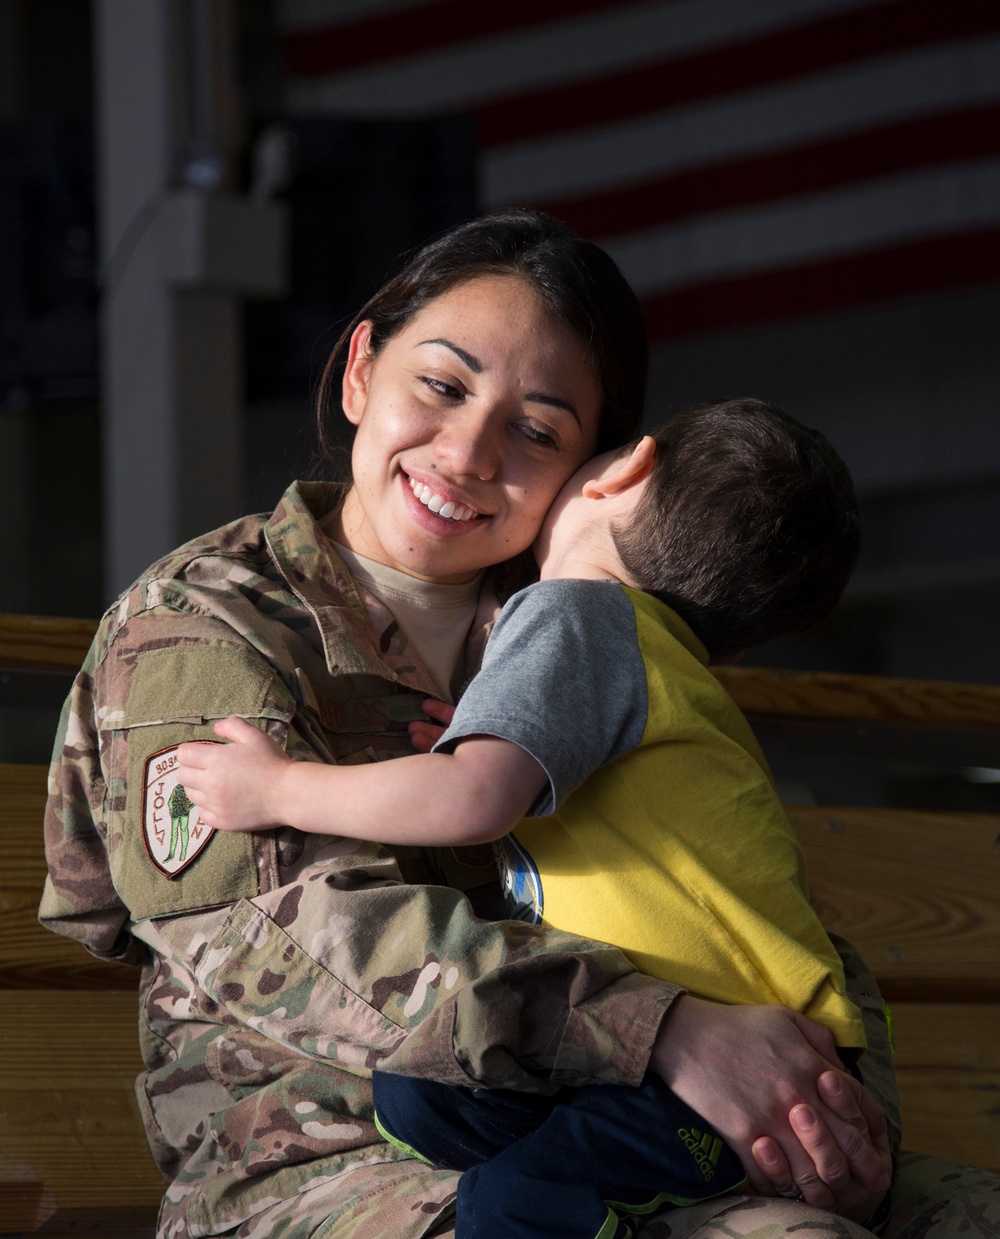 The 210th Rescue Squadron deploys to Africa in support of Operation Enduring Freedom